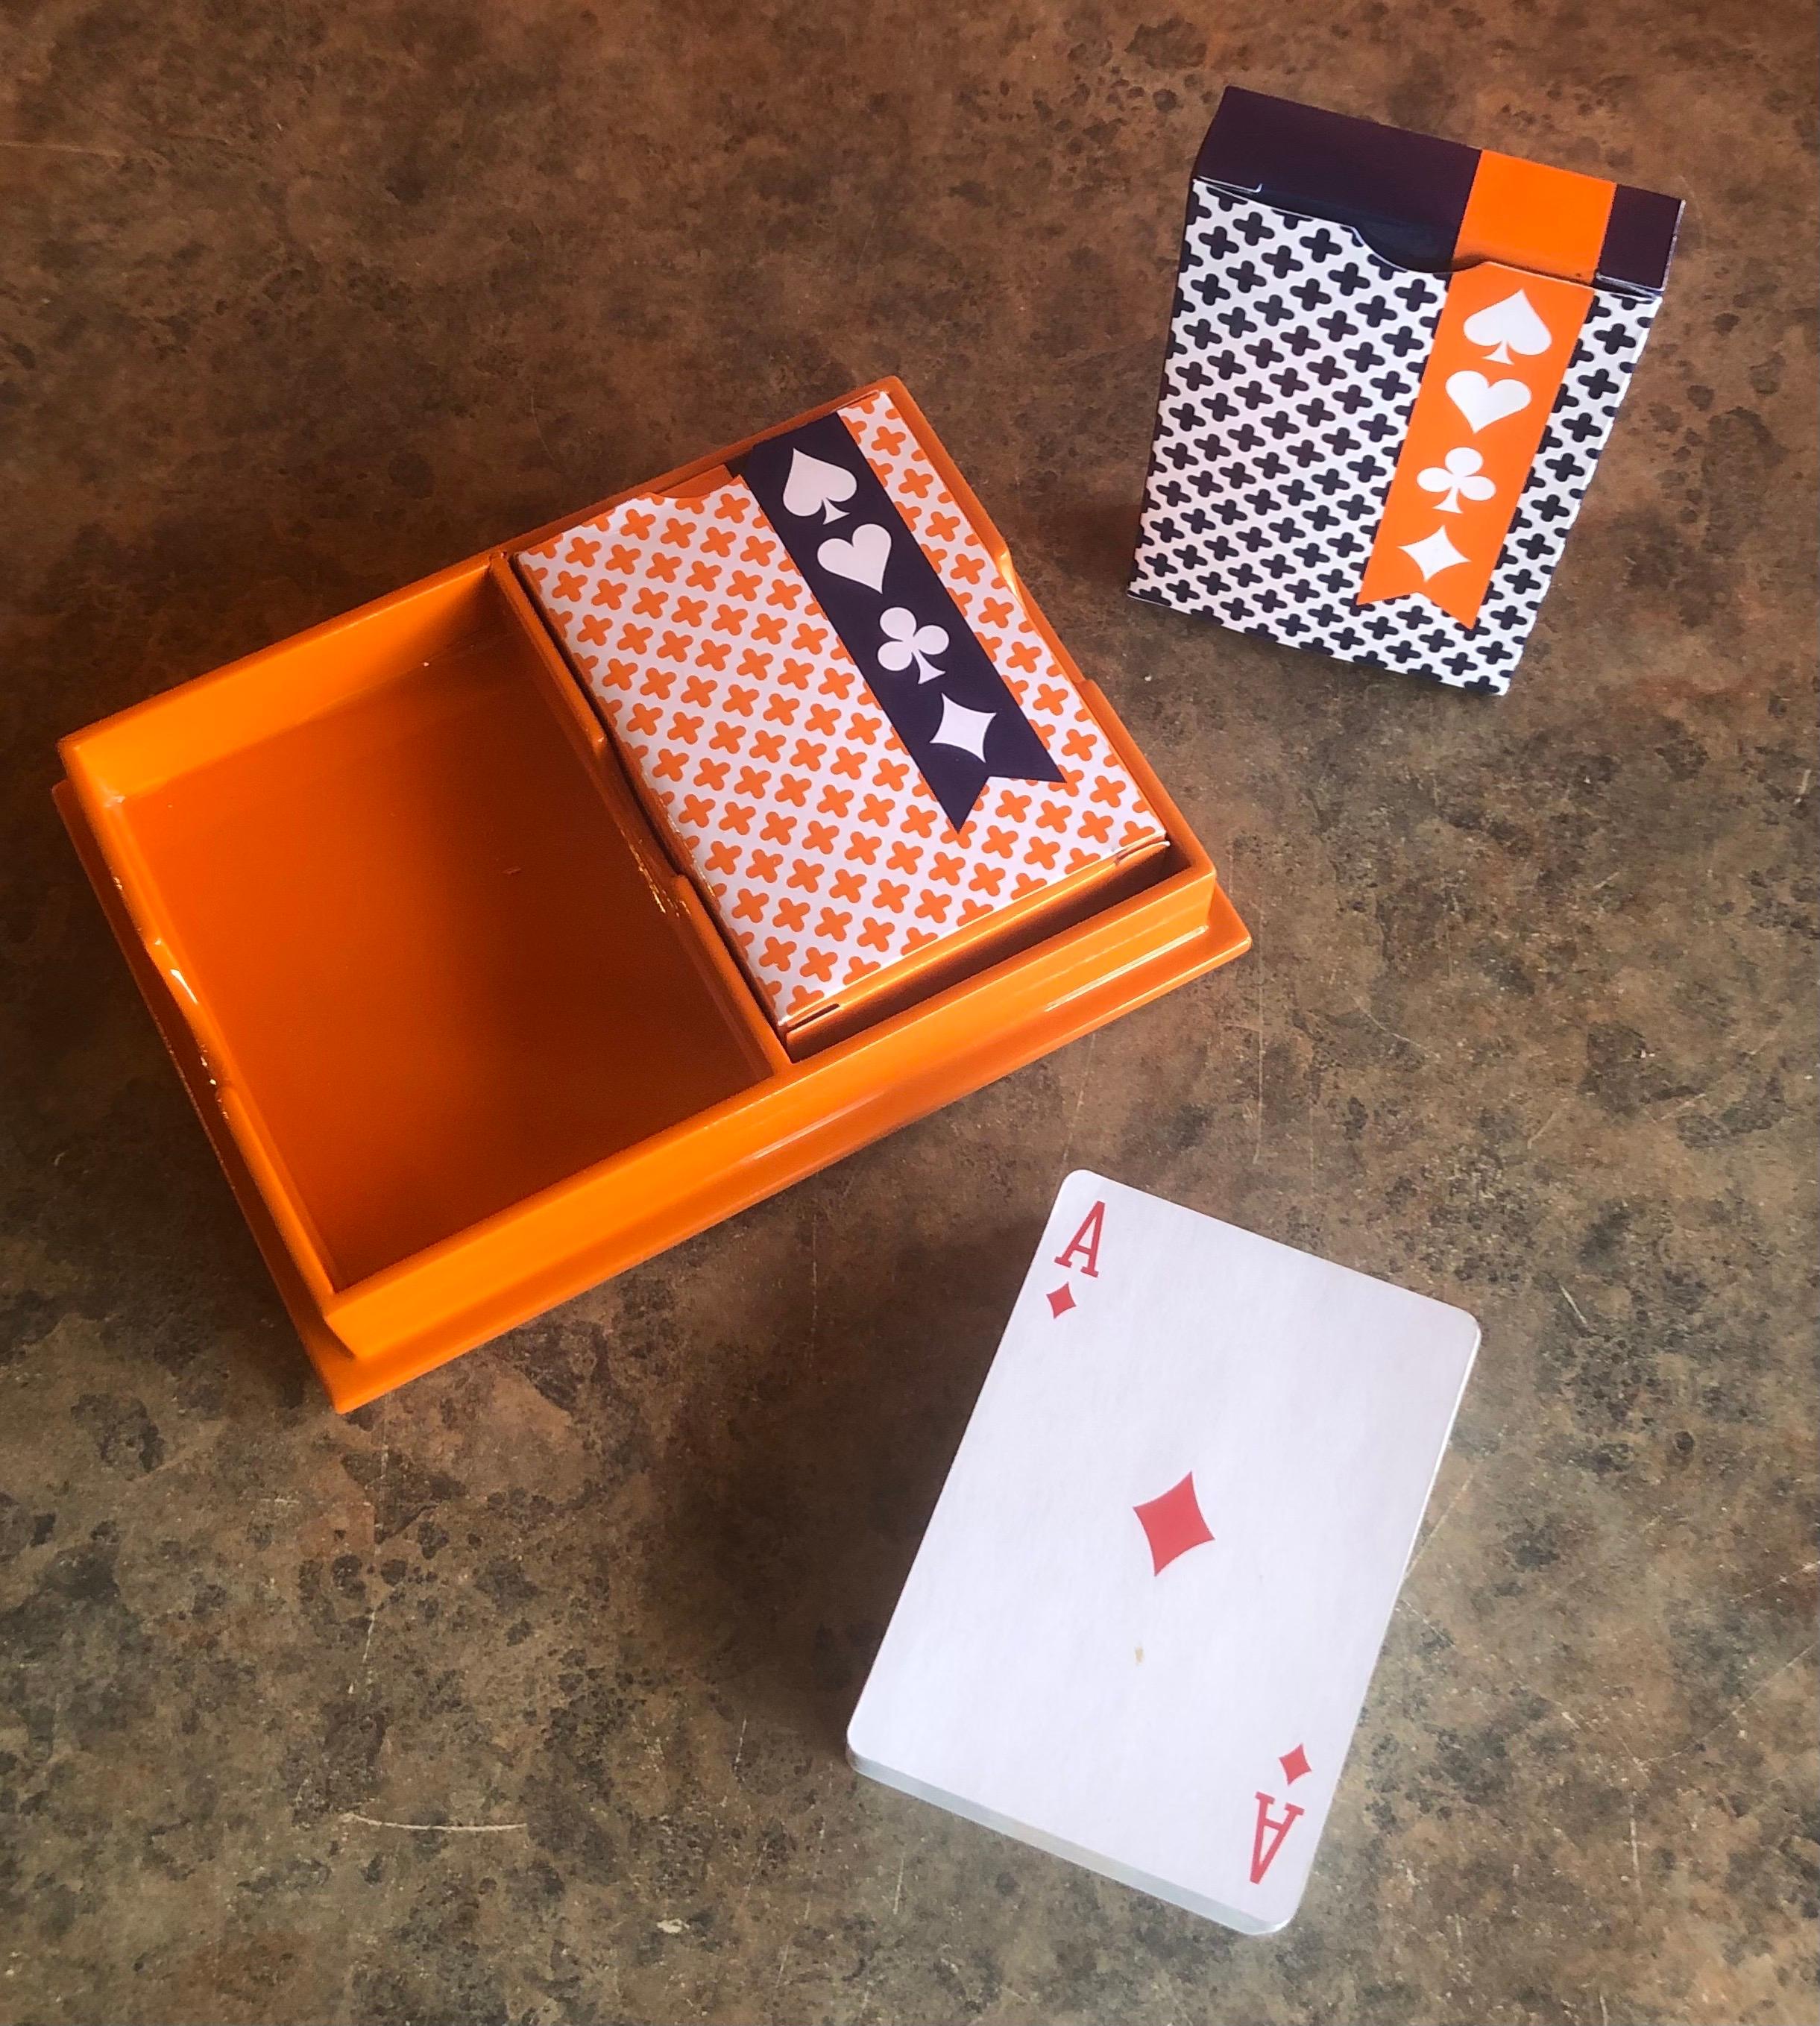 Very cool bright orange plastic case with pin stipes and two decks of playing cards by Jonathan Adler, circa 2000s. #1336.